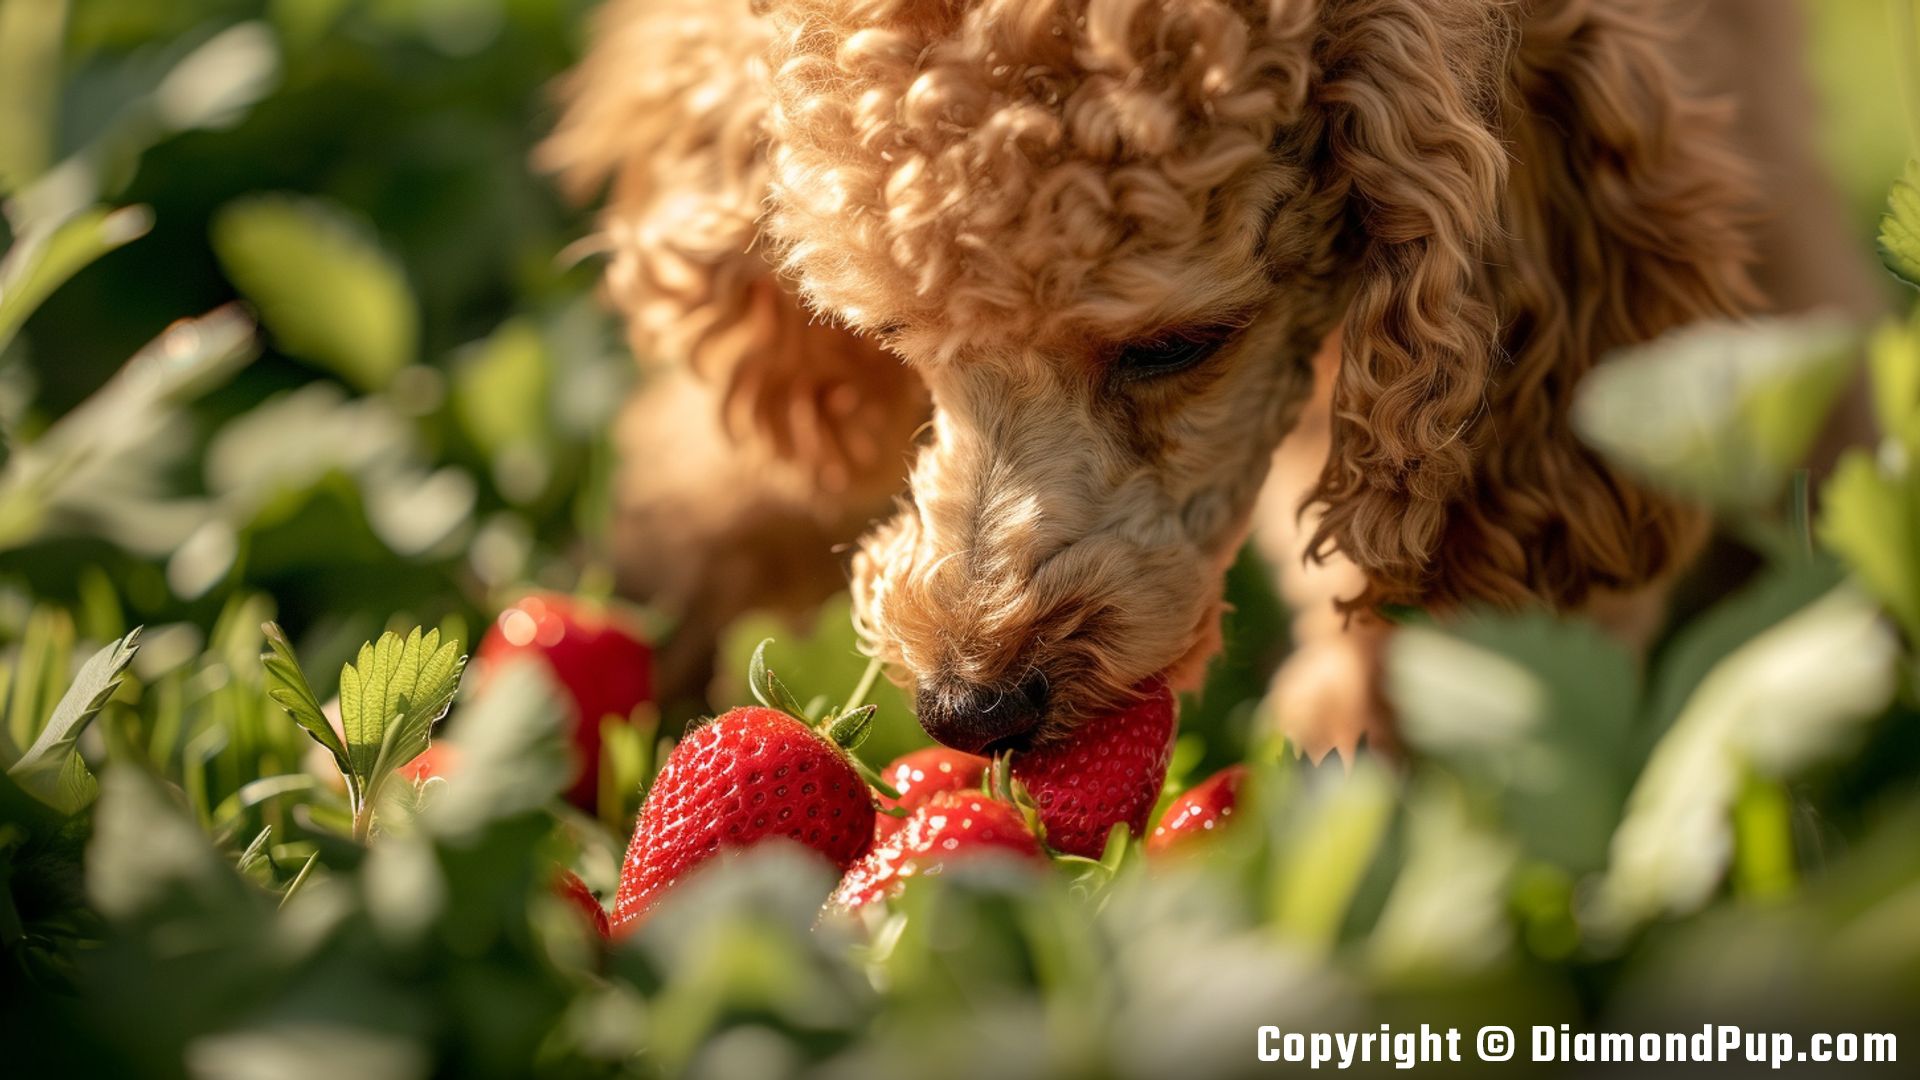 Photo of a Cute Poodle Snacking on Strawberries